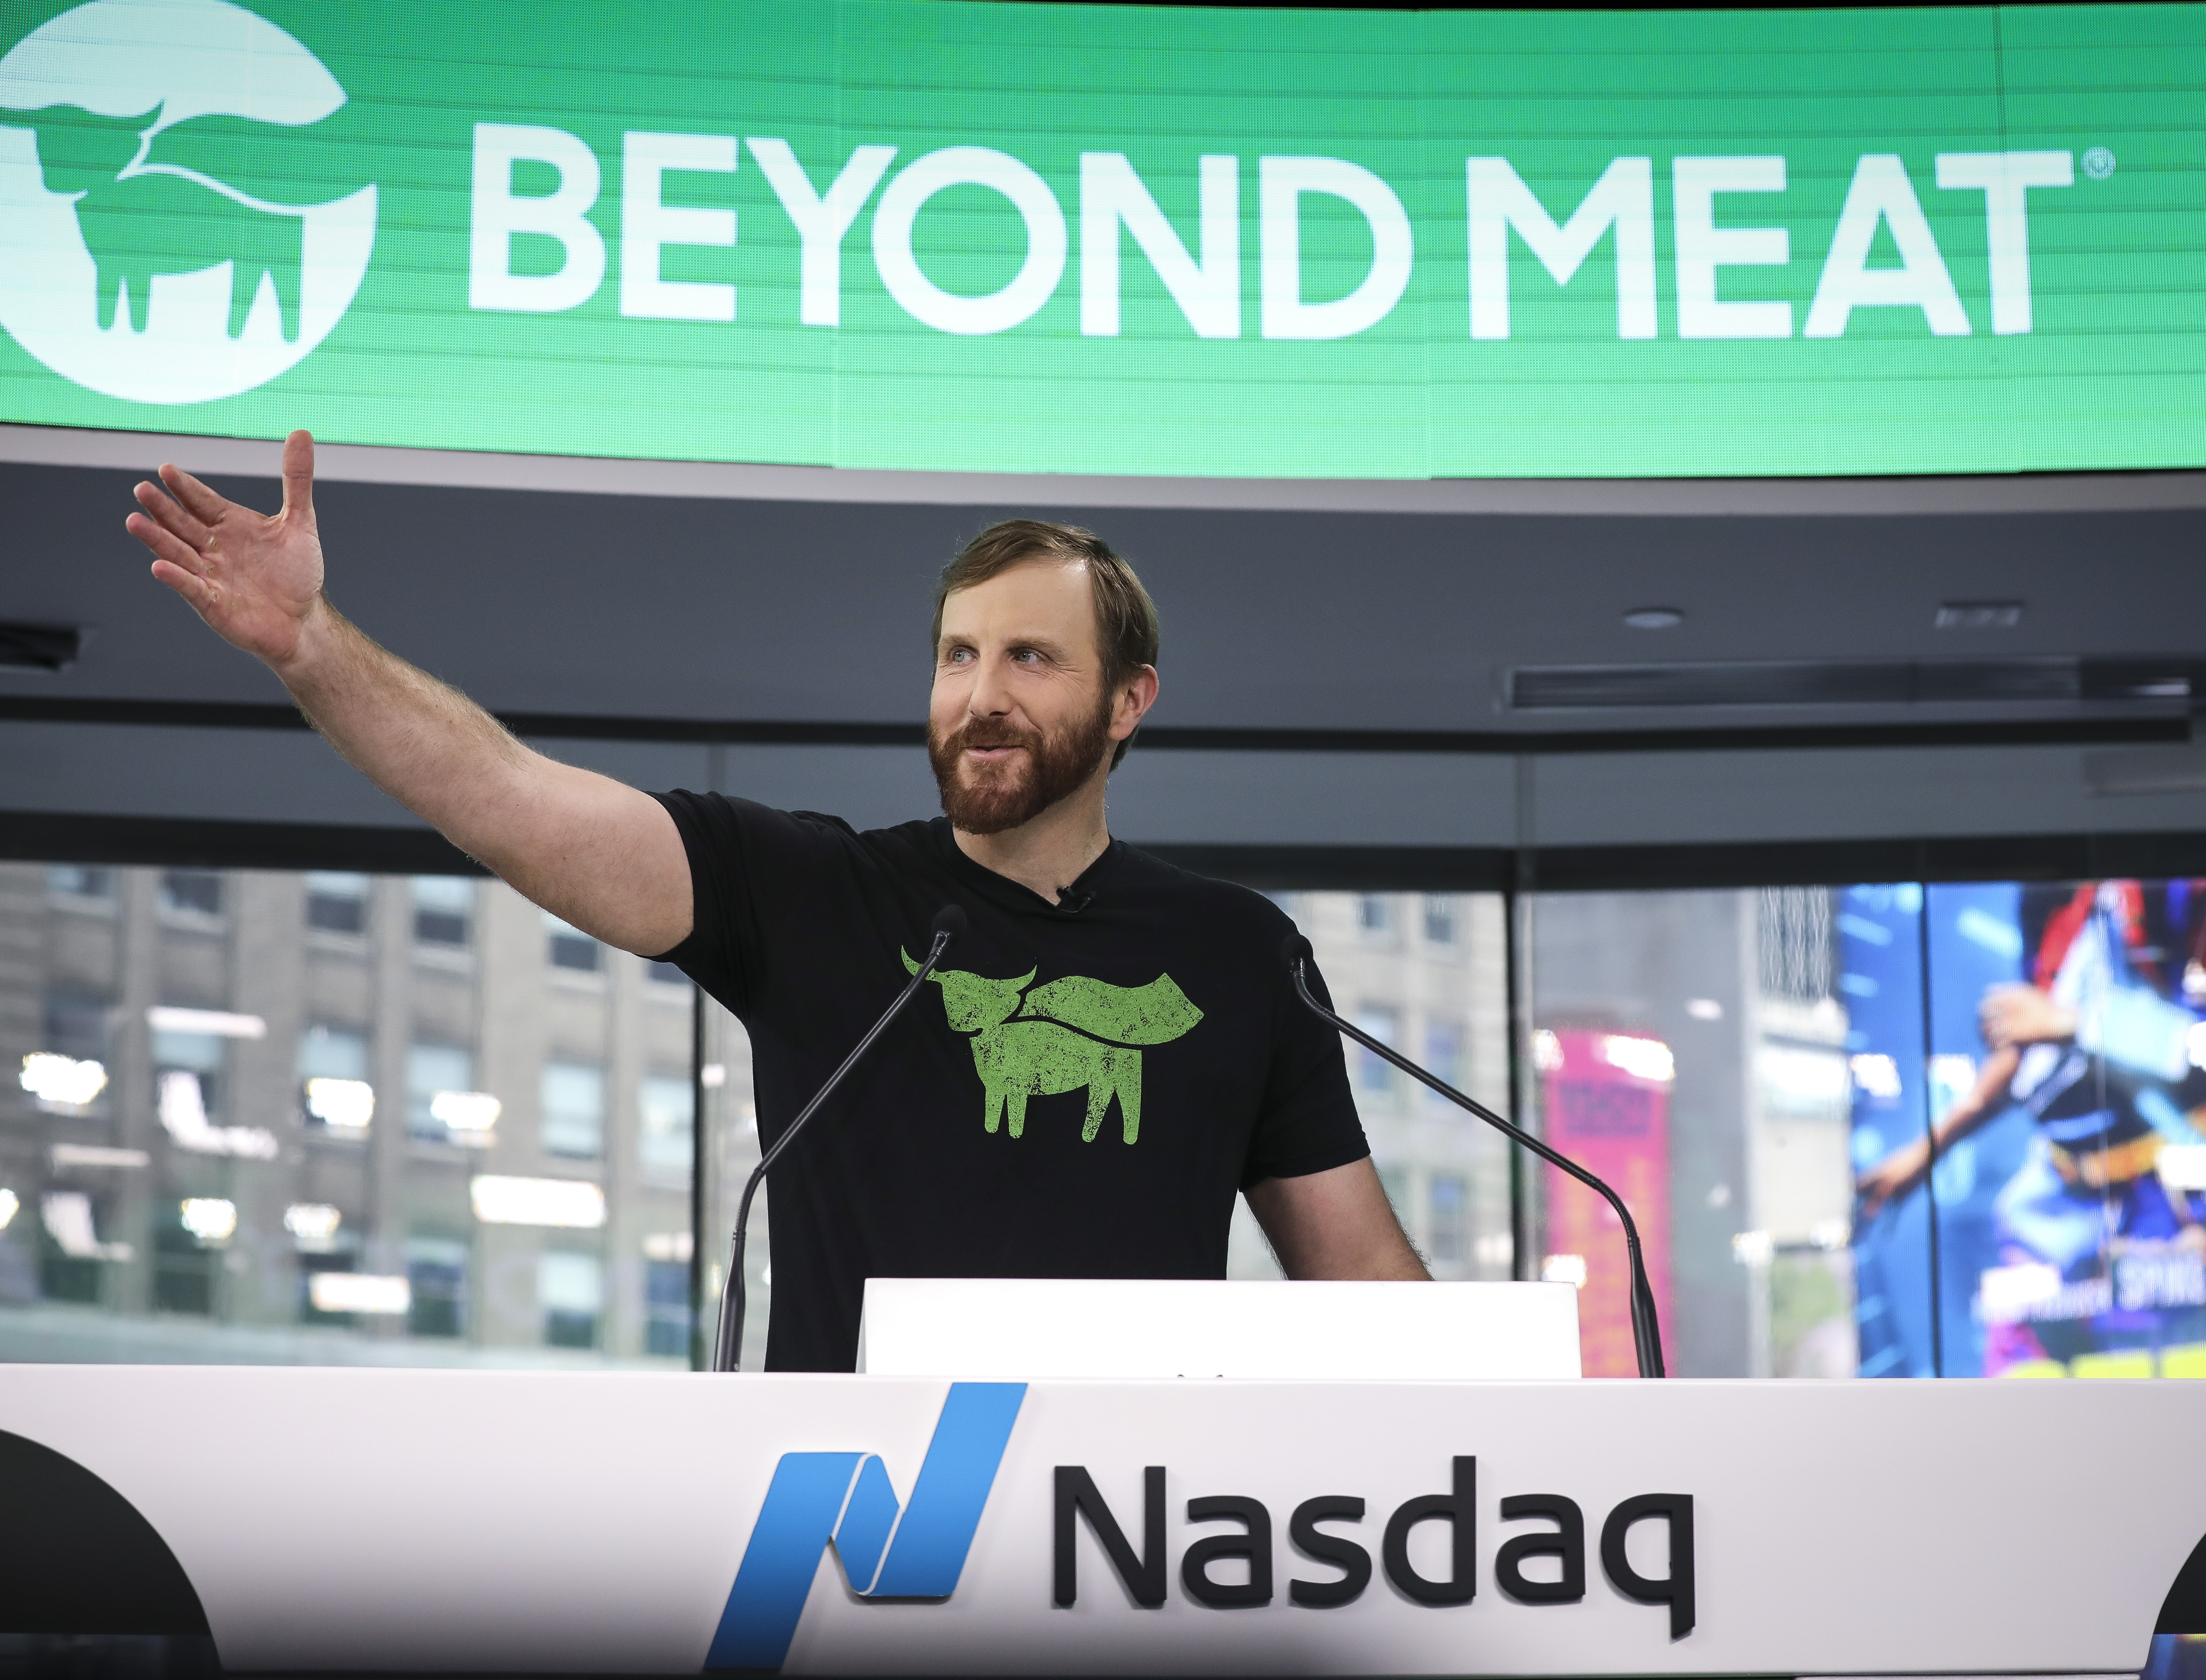 If only you'd invested in Beyond Meat when it first went public